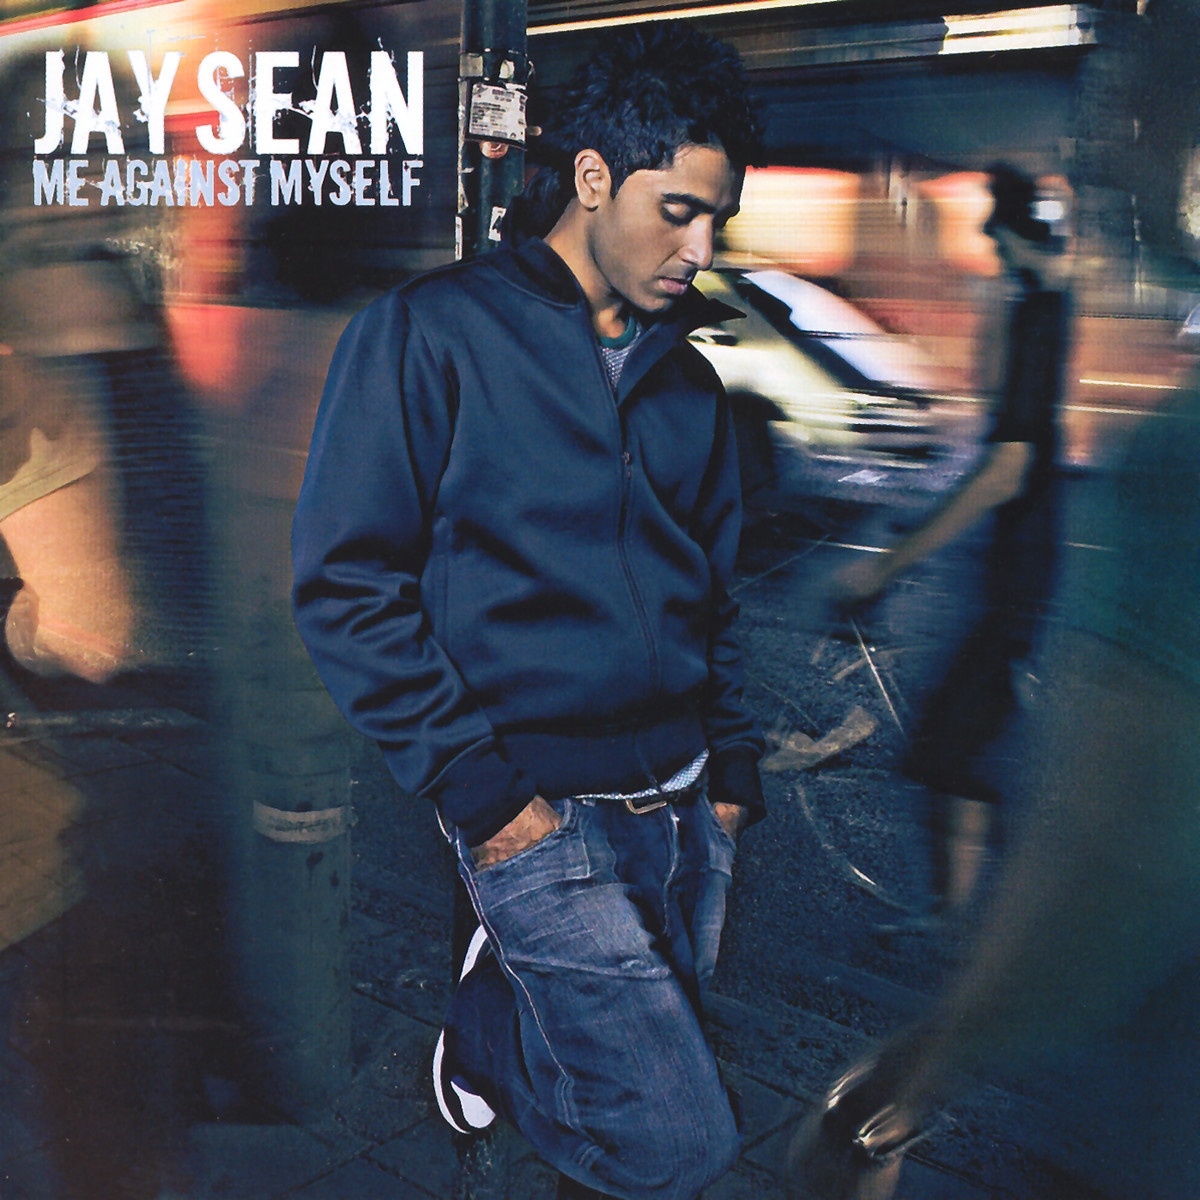 Dance With You (Original Version) (Feat. Jay Sean & Juggy D)